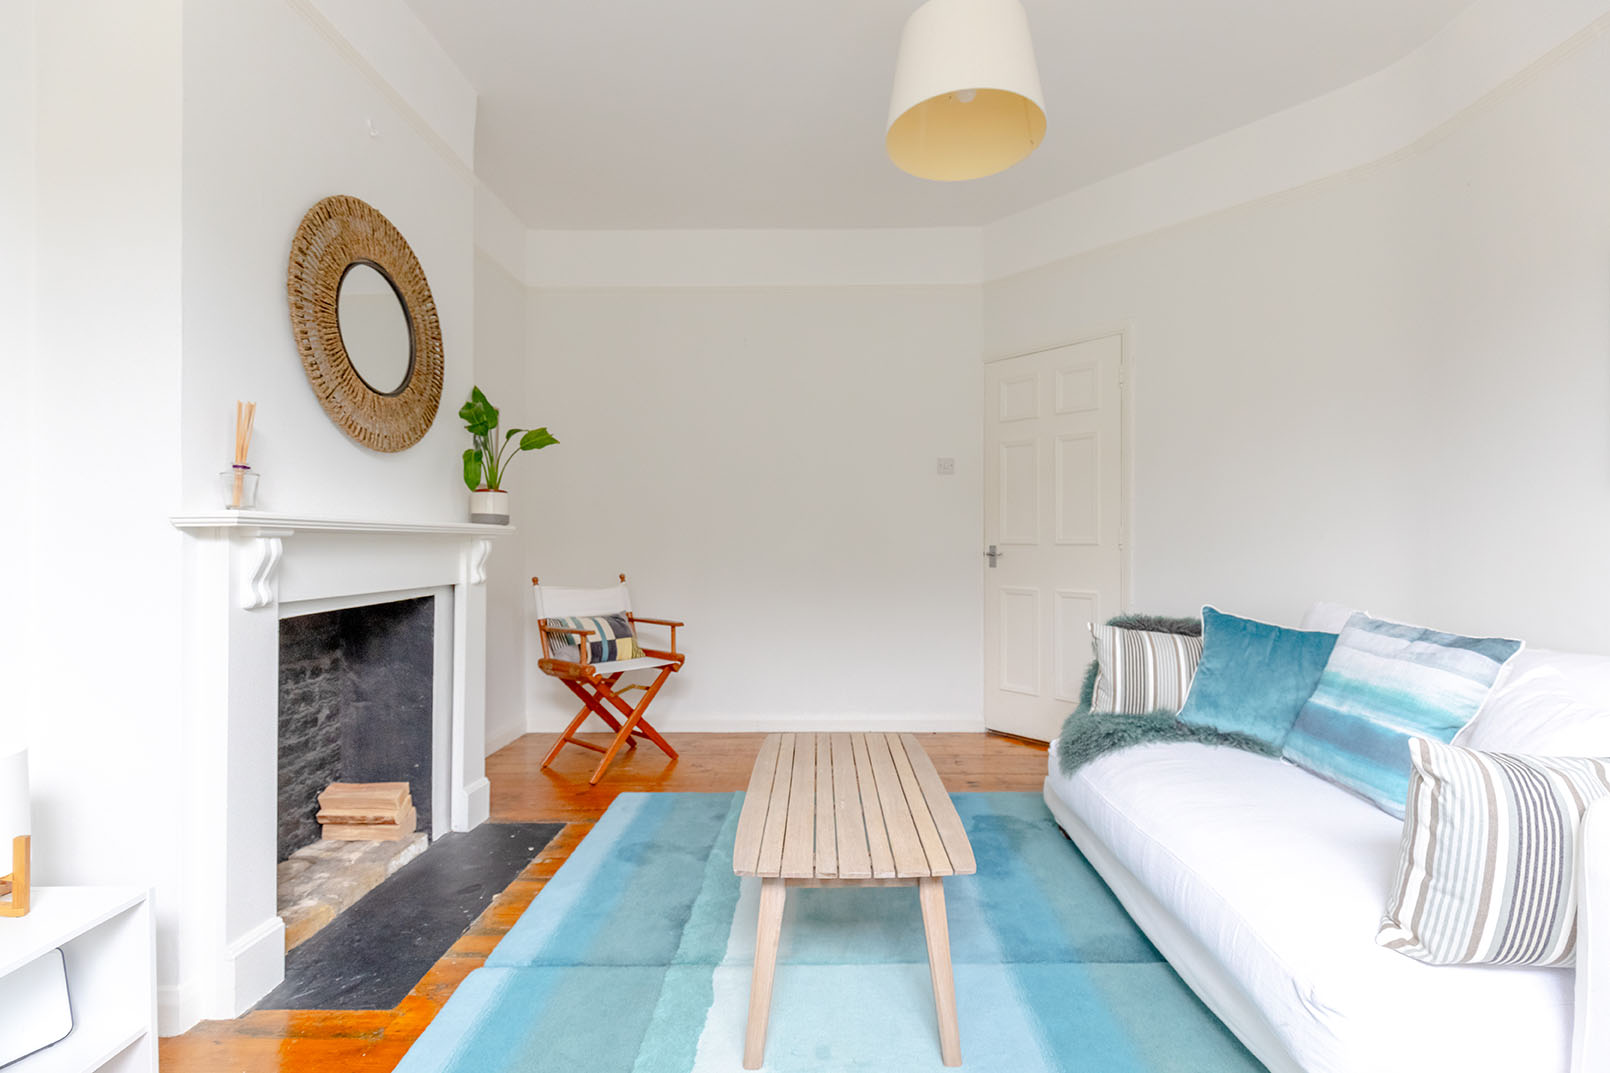 Direct angle for property photography of a Image of a smaller living room with wooden floor, a light blue coloured carpet on the floor, white walls and a fireplace.